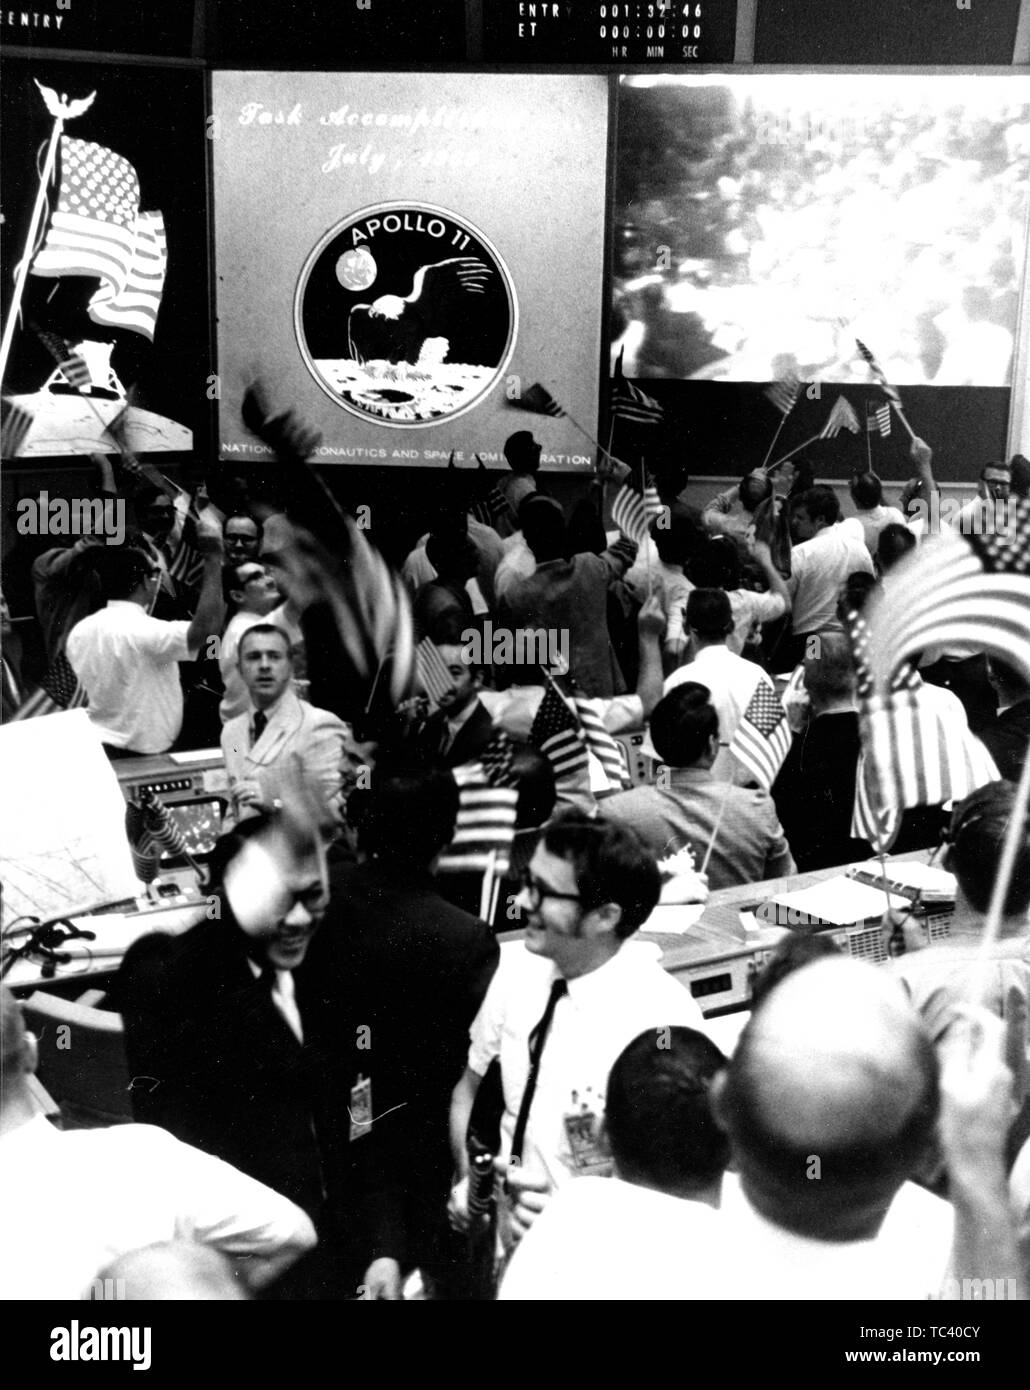 Flight control personnel celebrating the successful conclusion of the Apollo 11 lunar landing mission at the Mission Operations Control Room in the Mission Control Center, Building 30, Manned Spacecraft Center, Houston, Texas, July 24, 1969. Image courtesy National Aeronautics and Space Administration (NASA). () Stock Photo